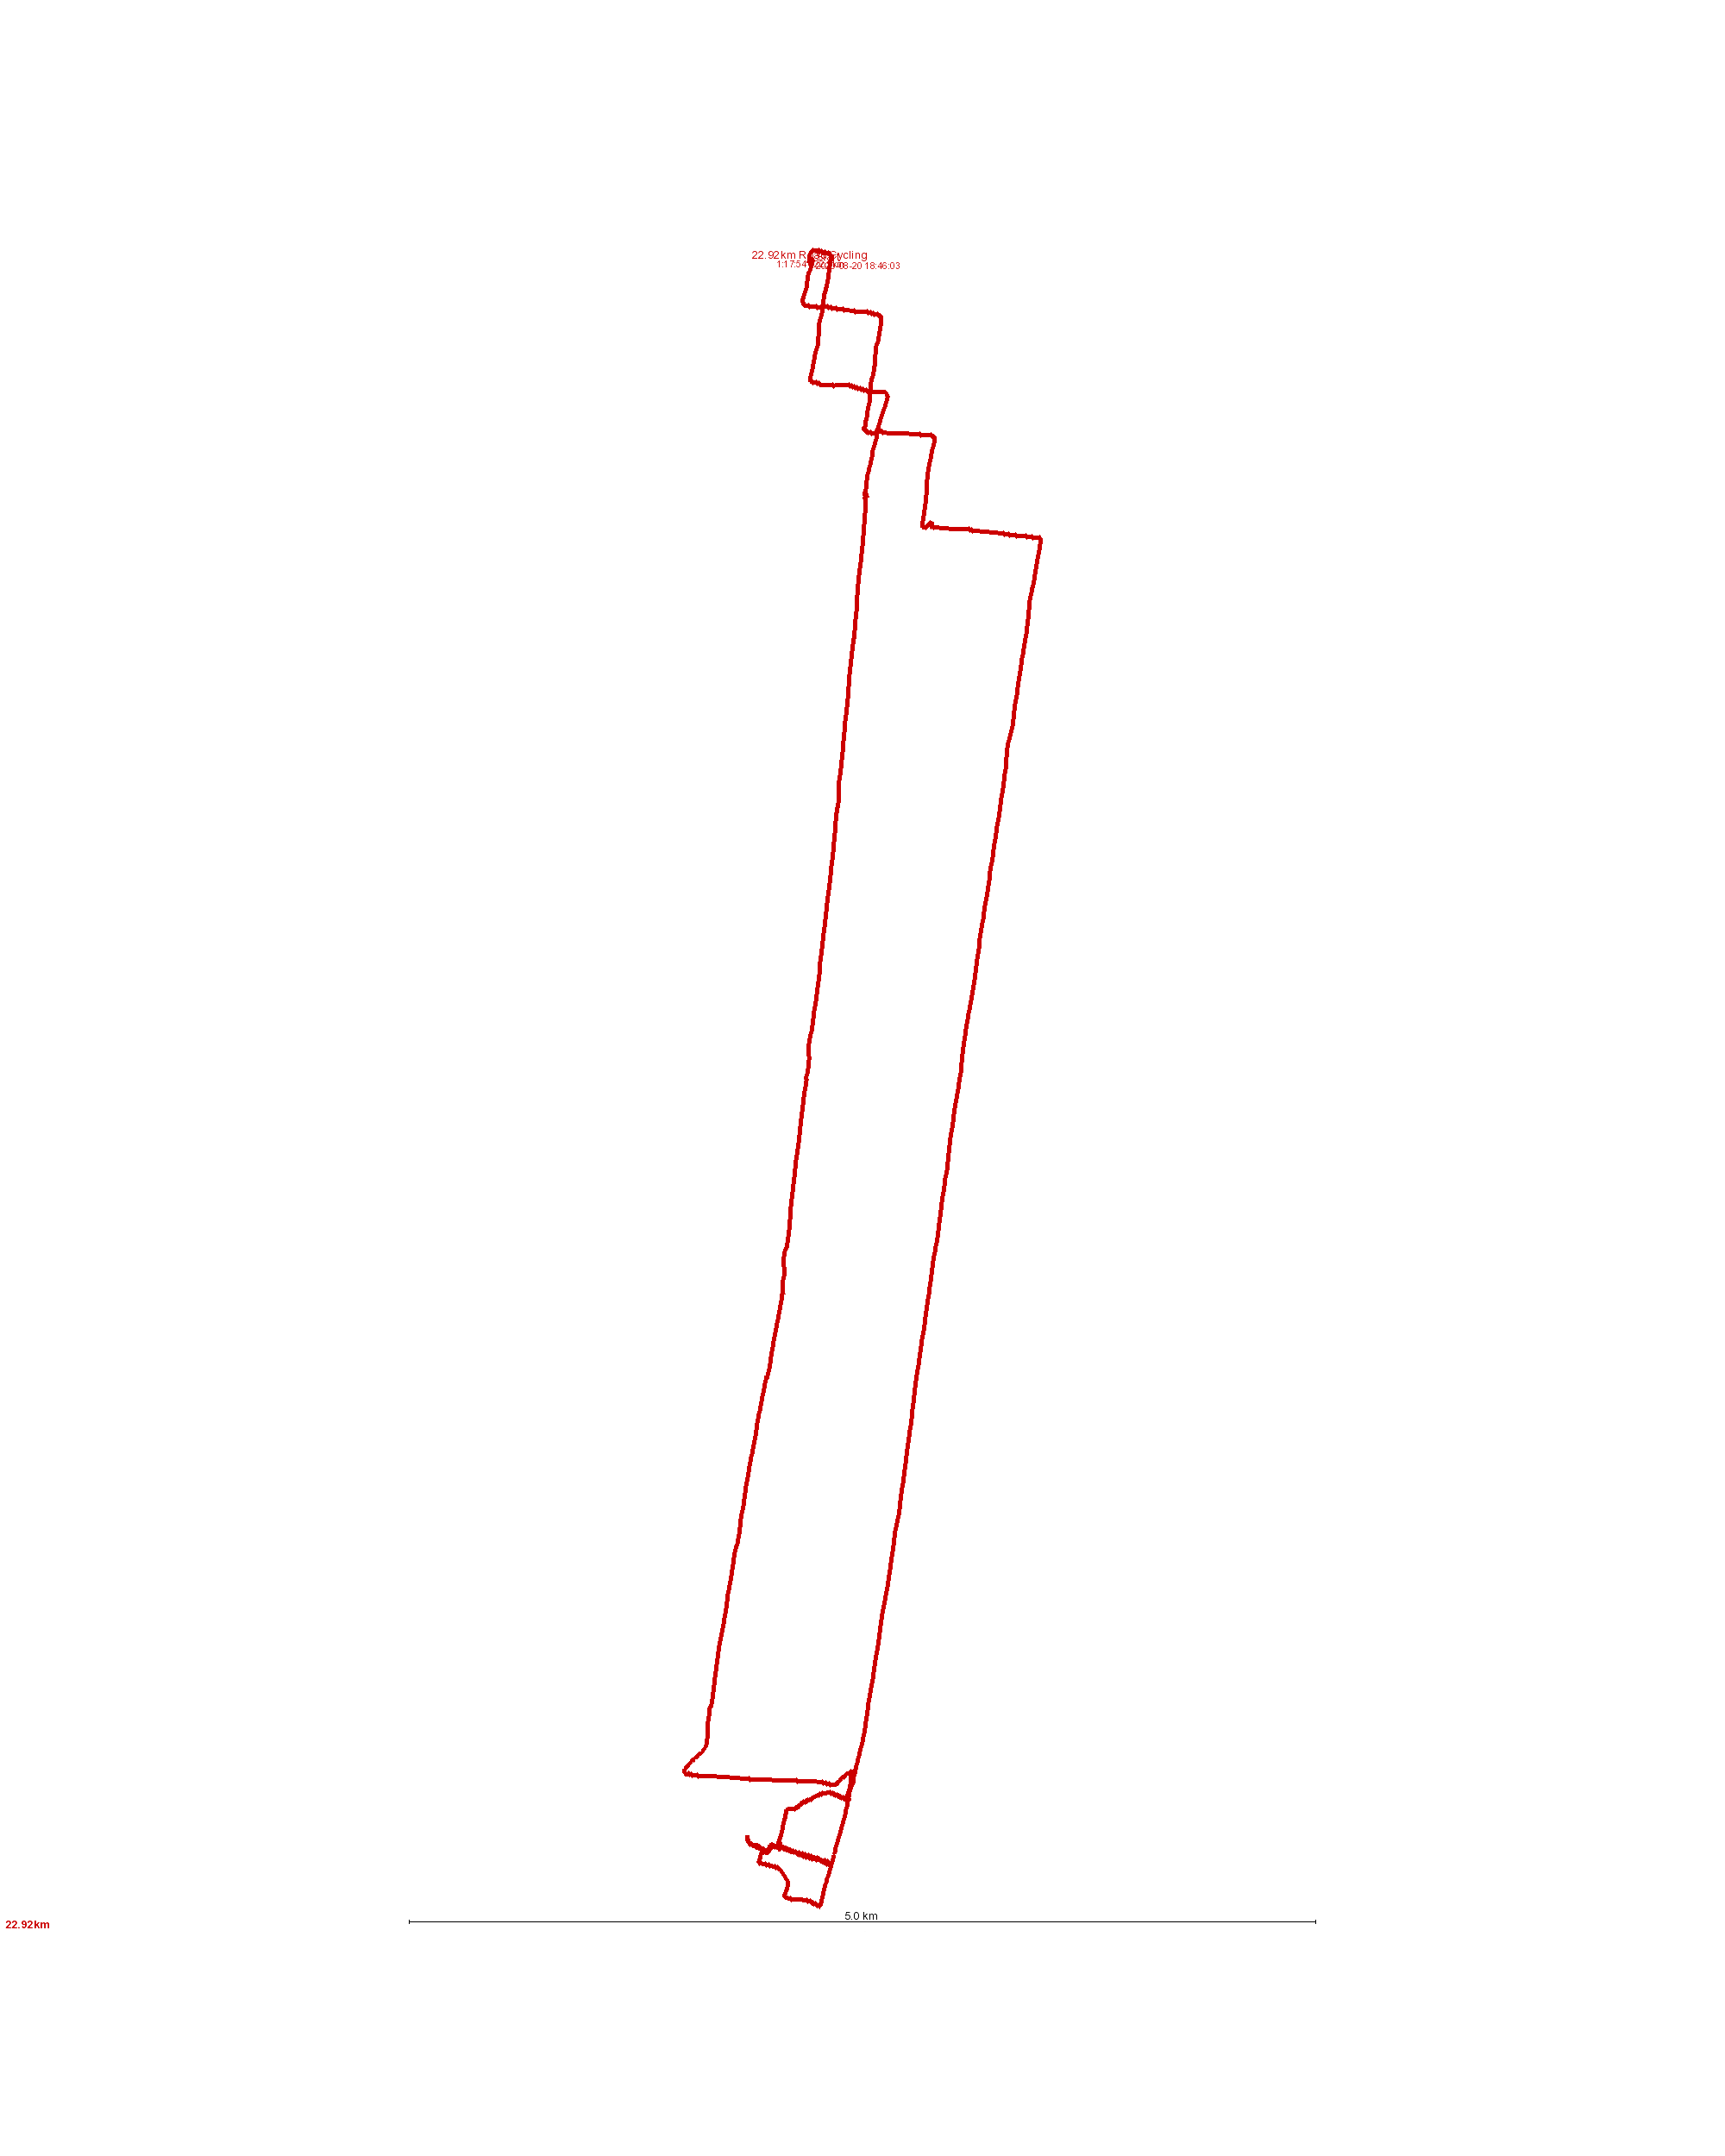 20200820181659-38058-map (1).png